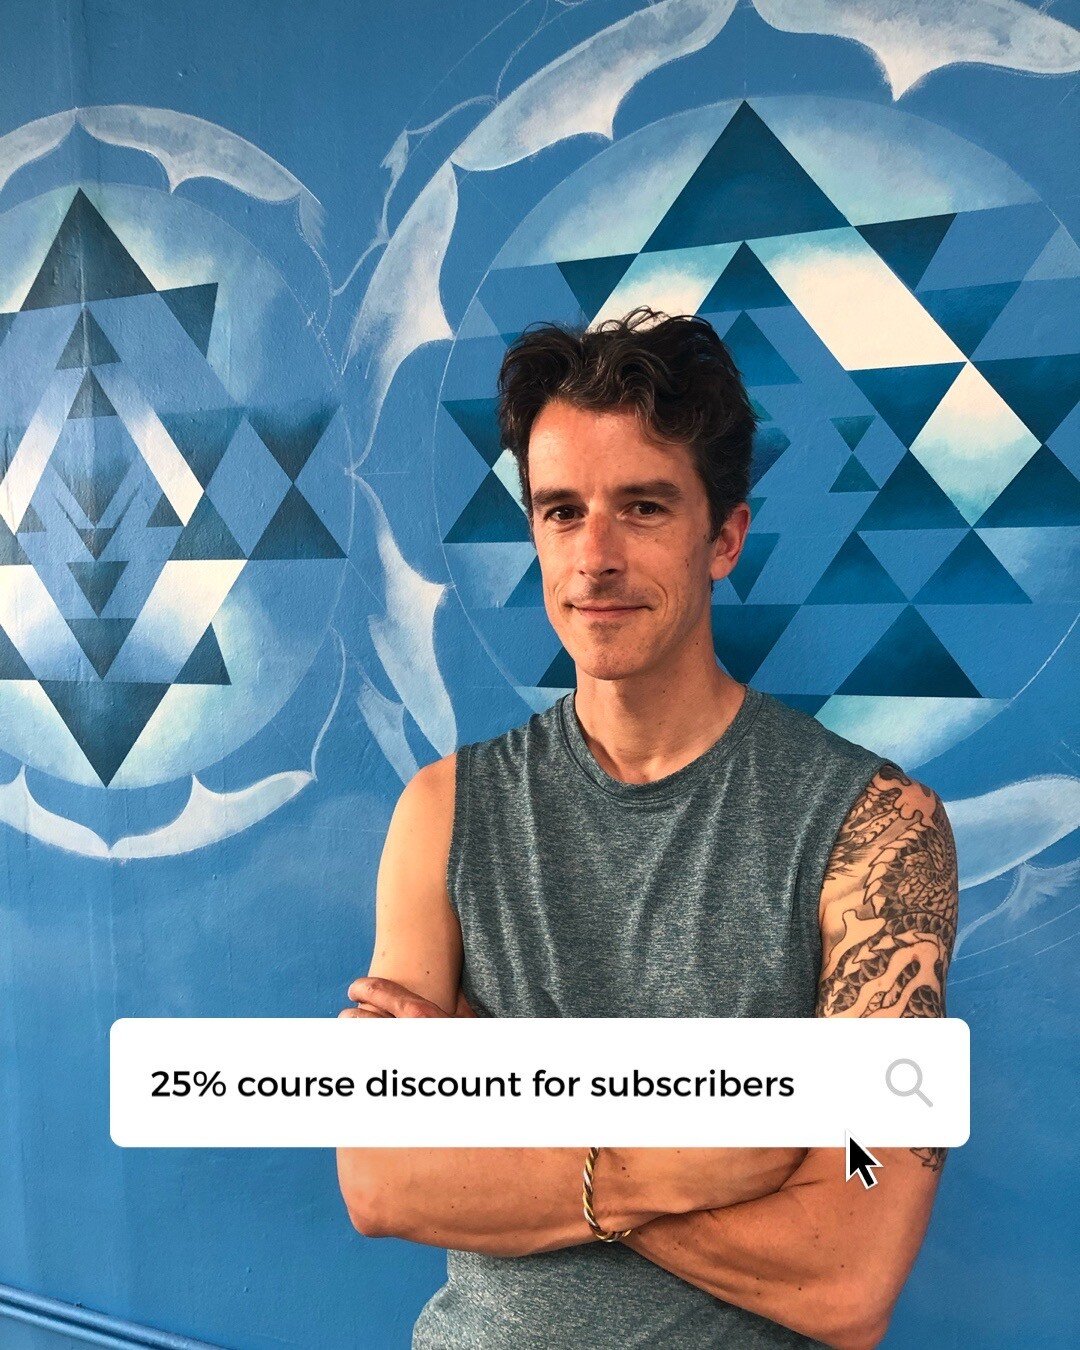 My Cosmic Diamonds email newsletter is getting an upgrade: I'm going to start using the newsletter to explore a broader range of topics, like the Consciousness Revolution / Cosmic Renaissance we're moving through or the intersection of artificial int